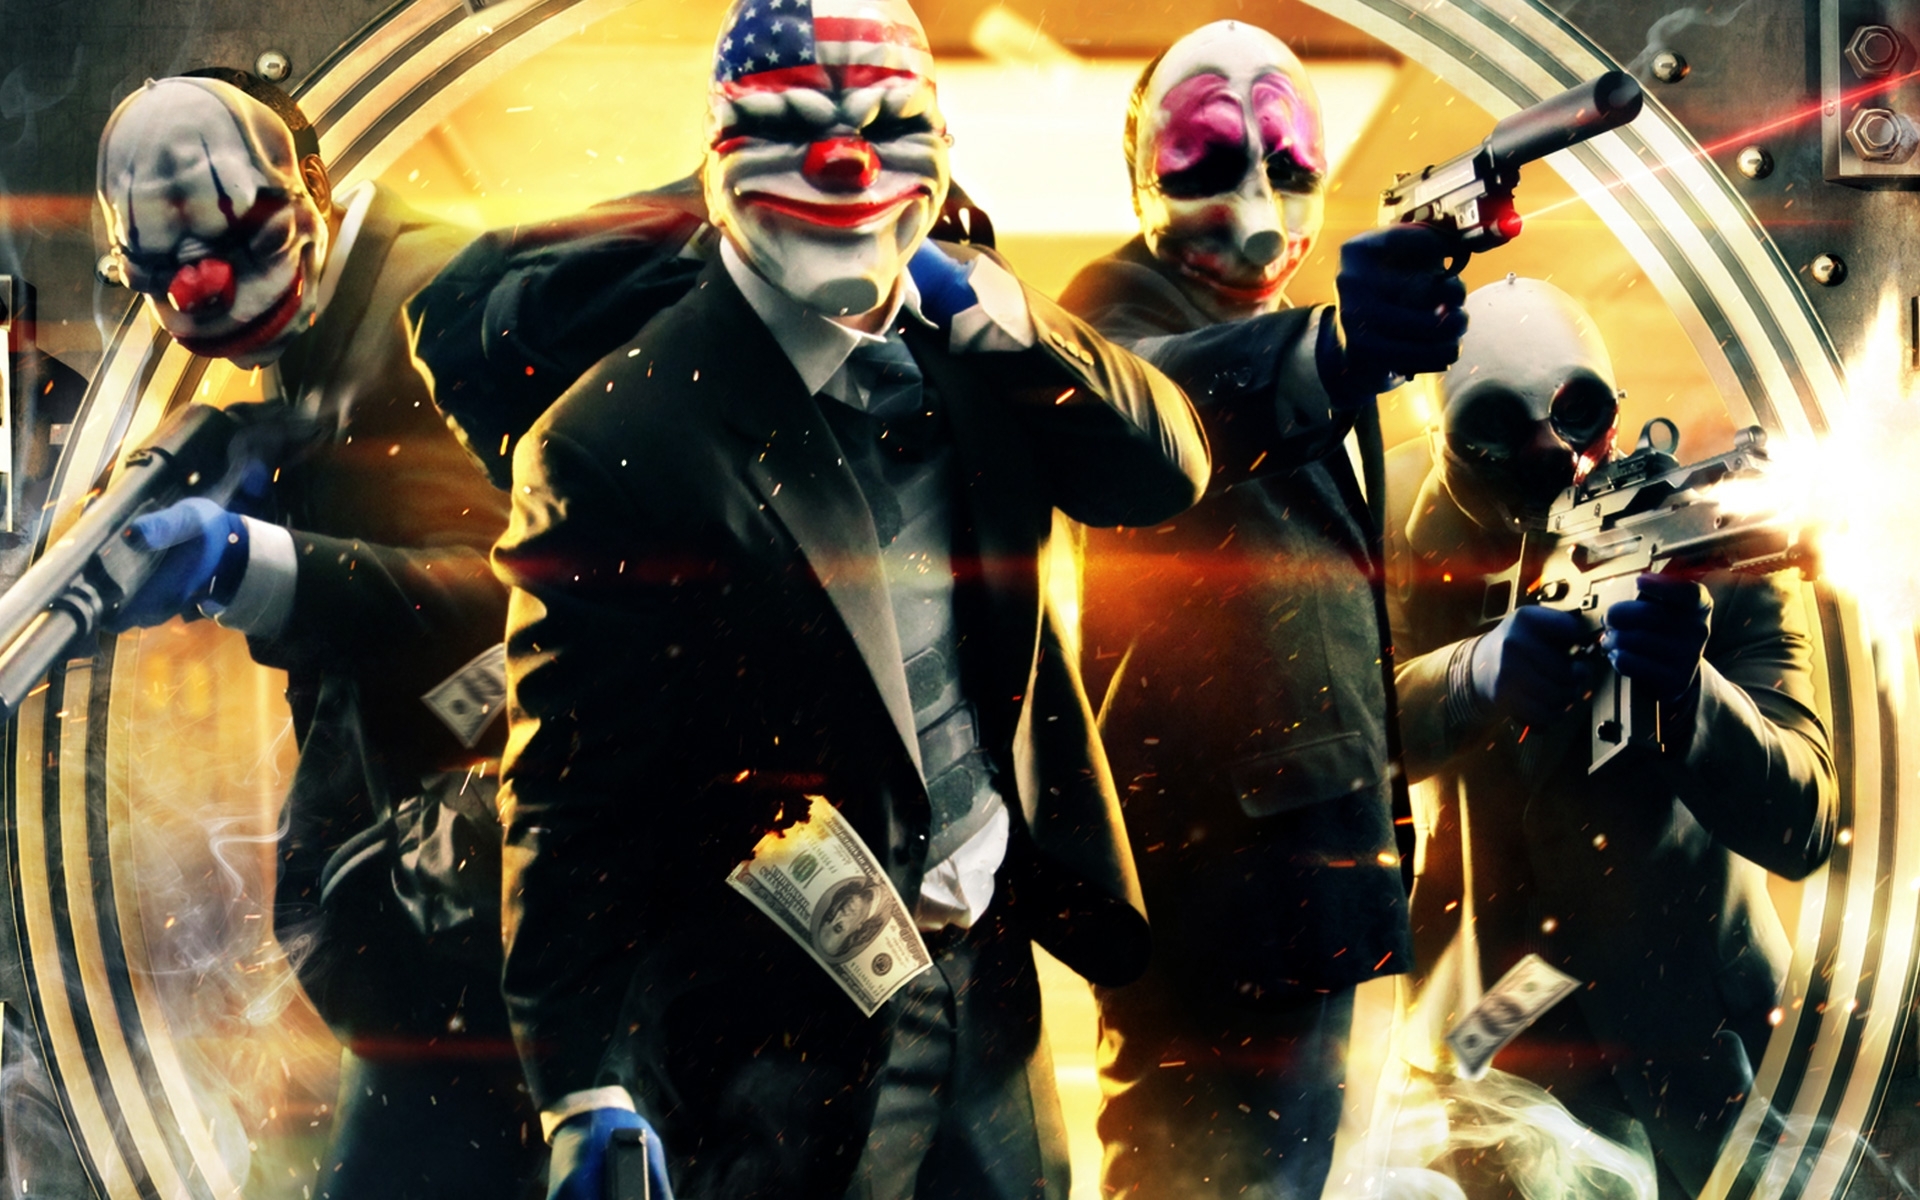 free download payday 2 pc